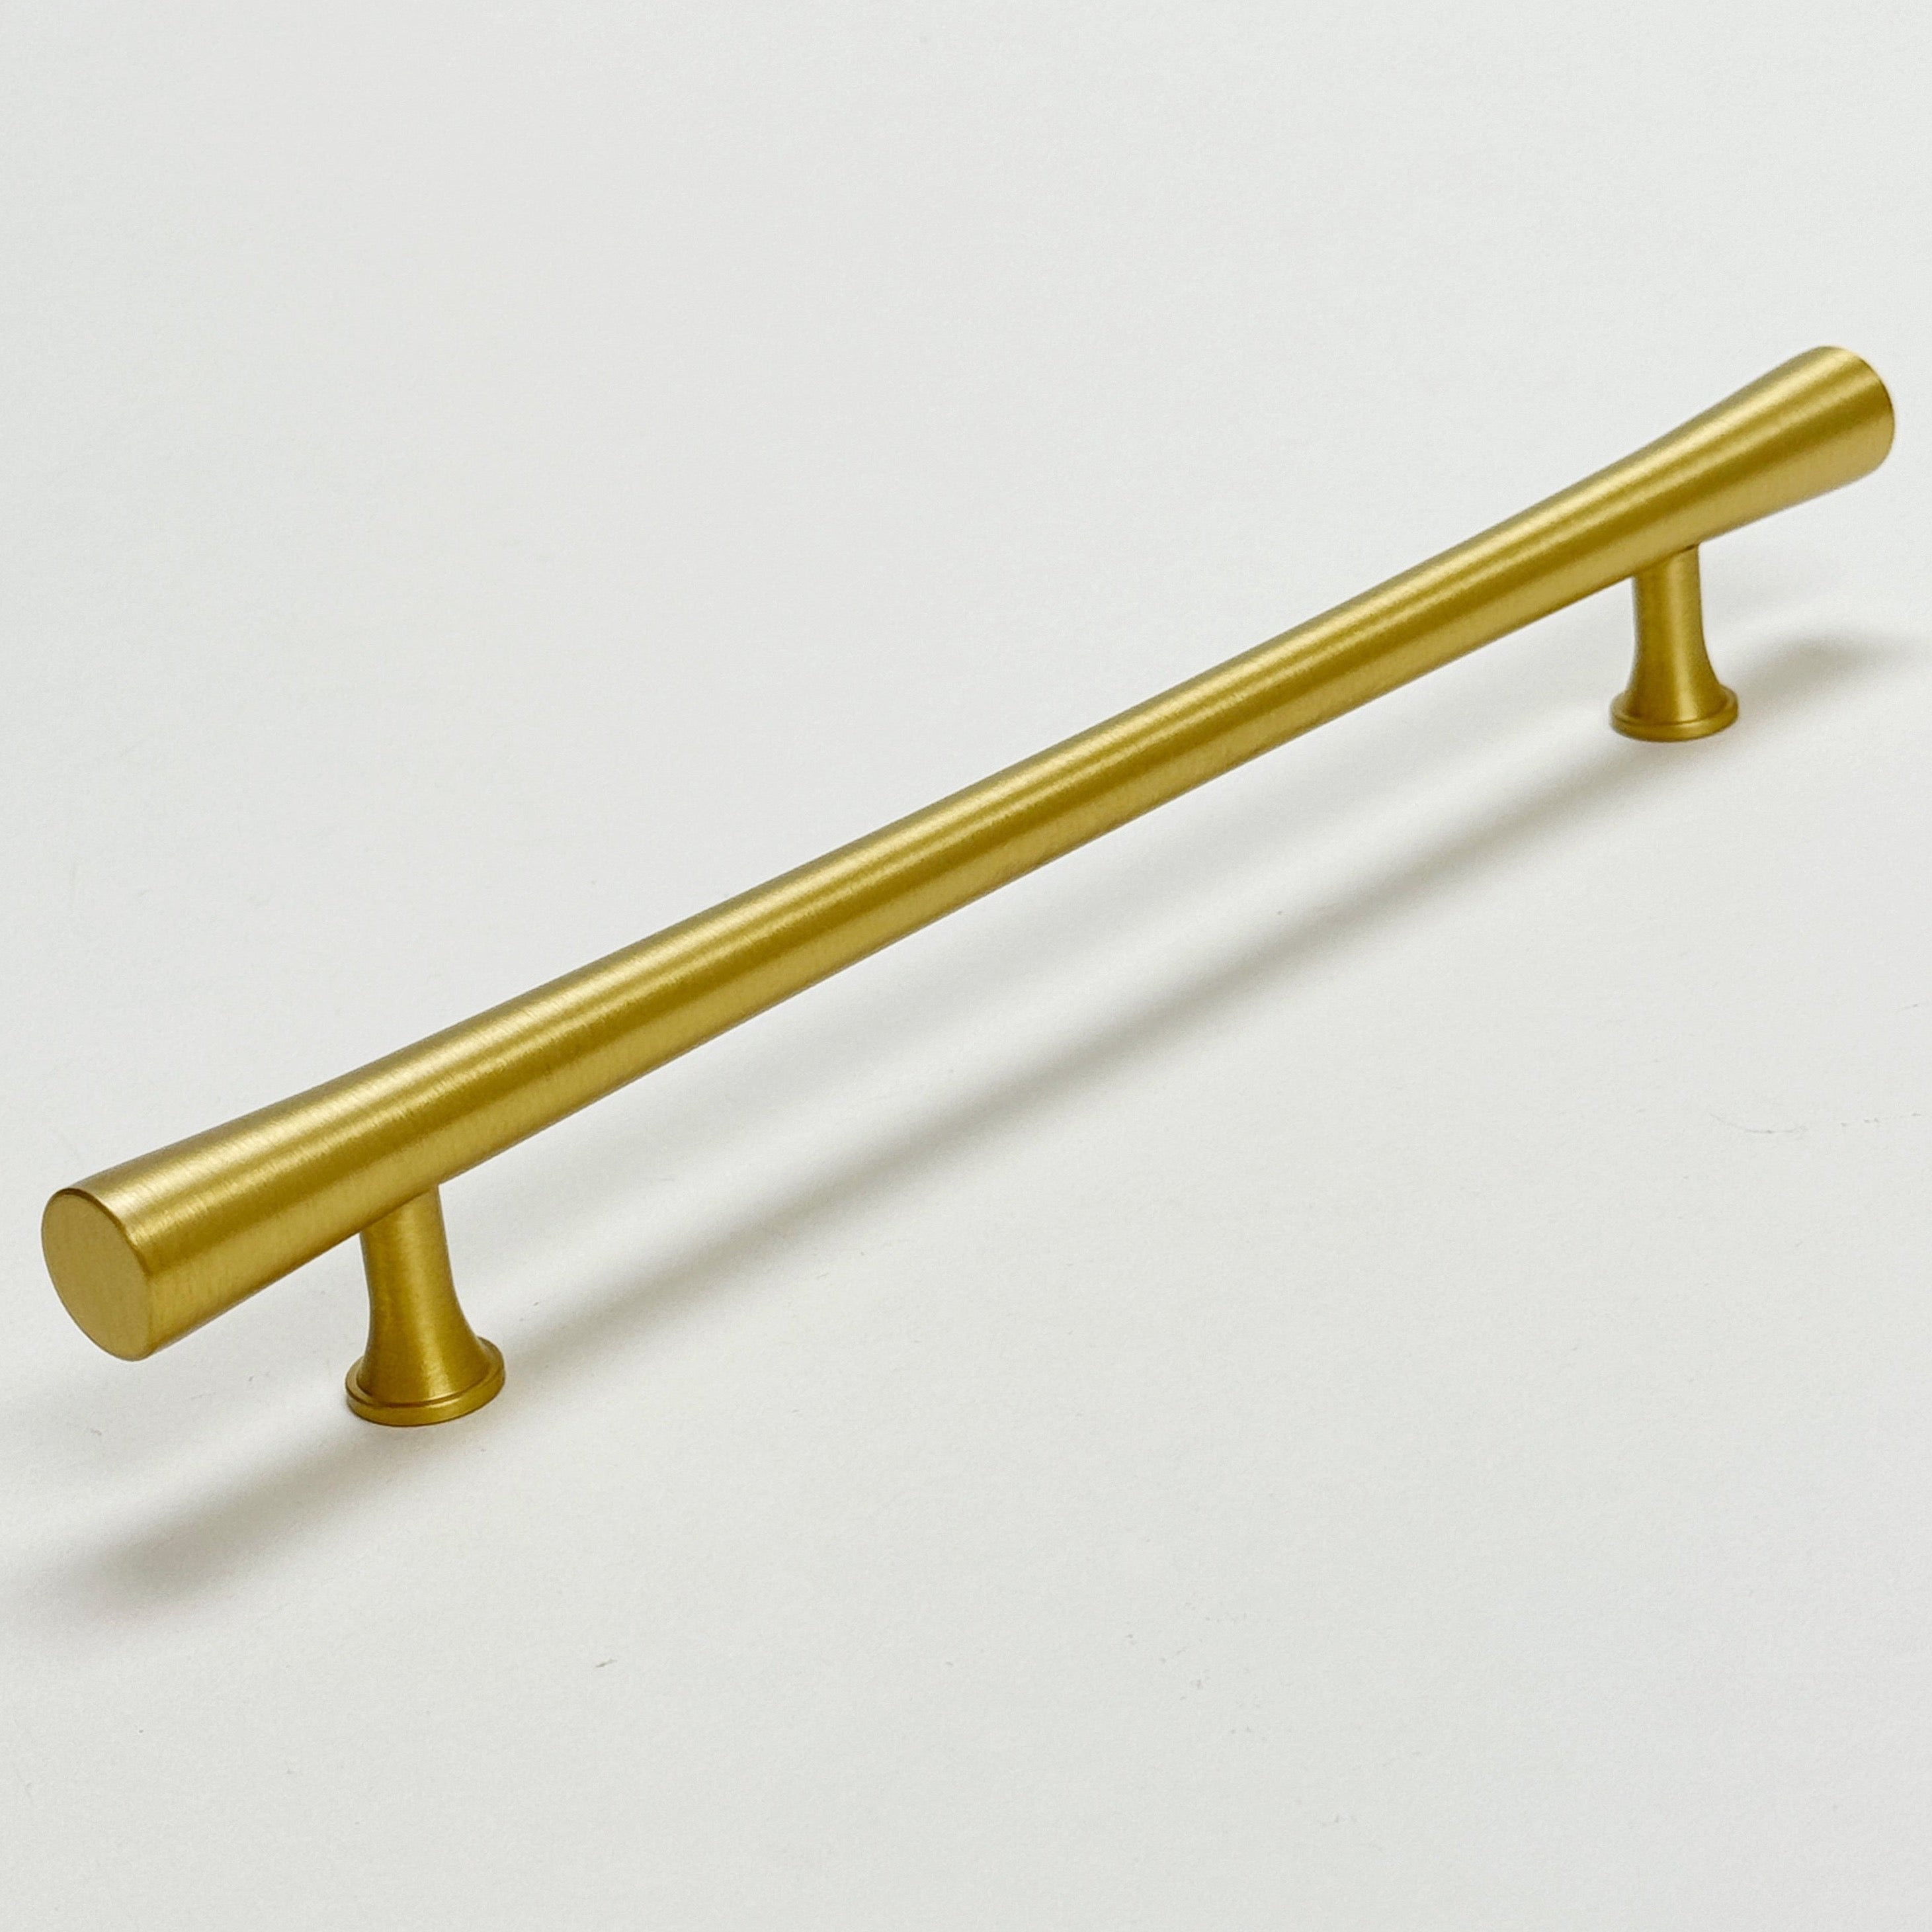 Satin Brass Cabinet Hardware "Collin" Drawer Pulls and Cabinet Knobs - Forge Hardware Studio